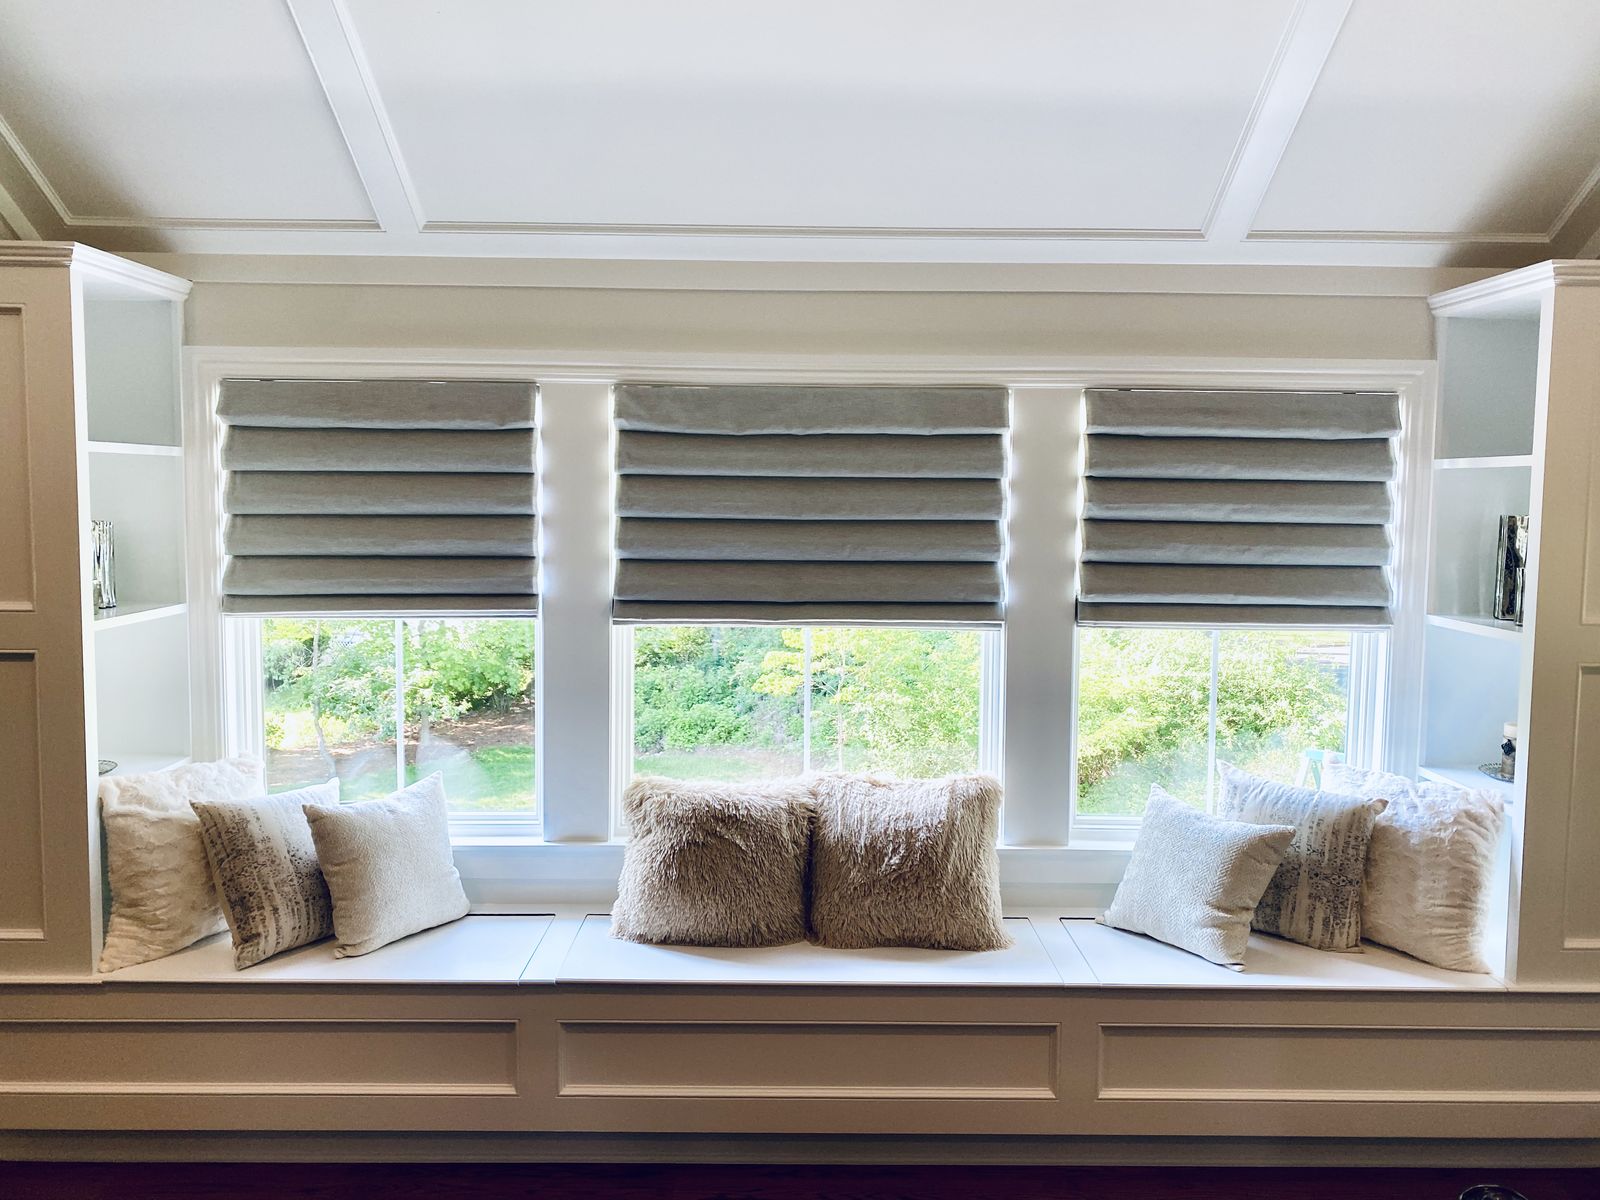 Classic fold Roman shades in a lovely sitting nook